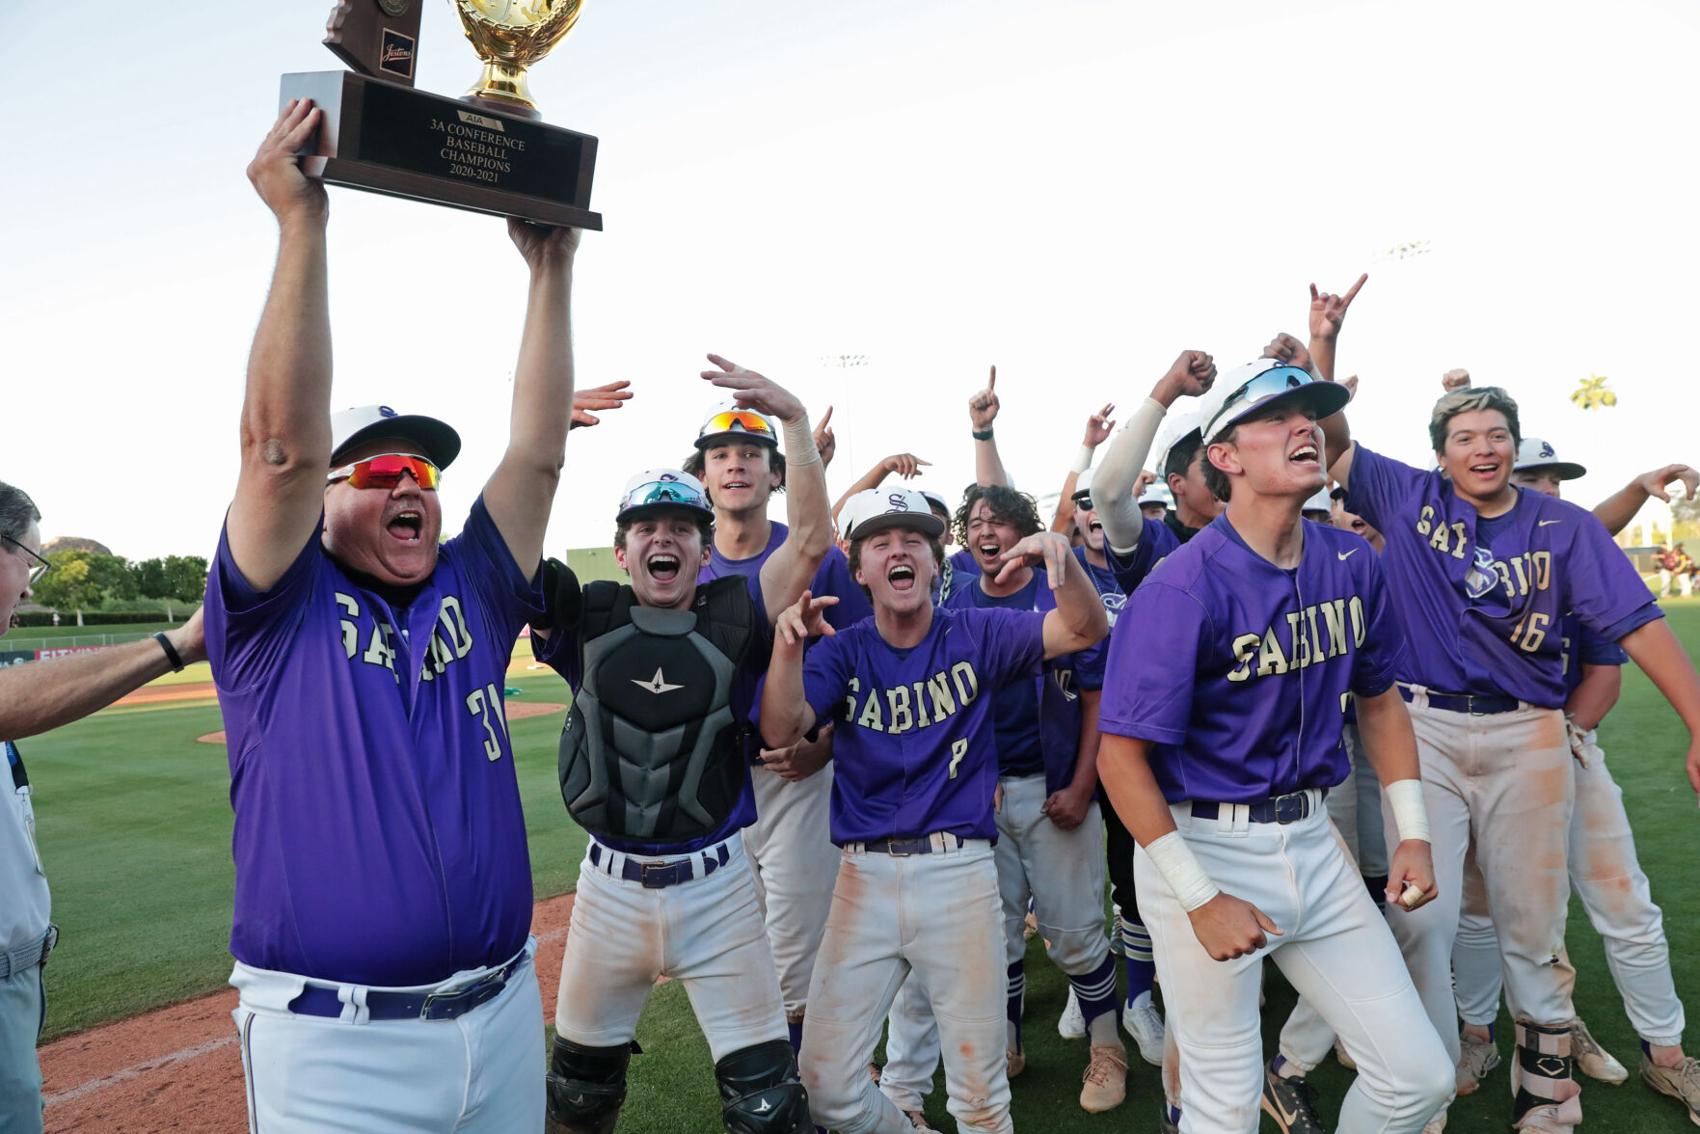 Sabino baseball team holds off rally to win second straight state title